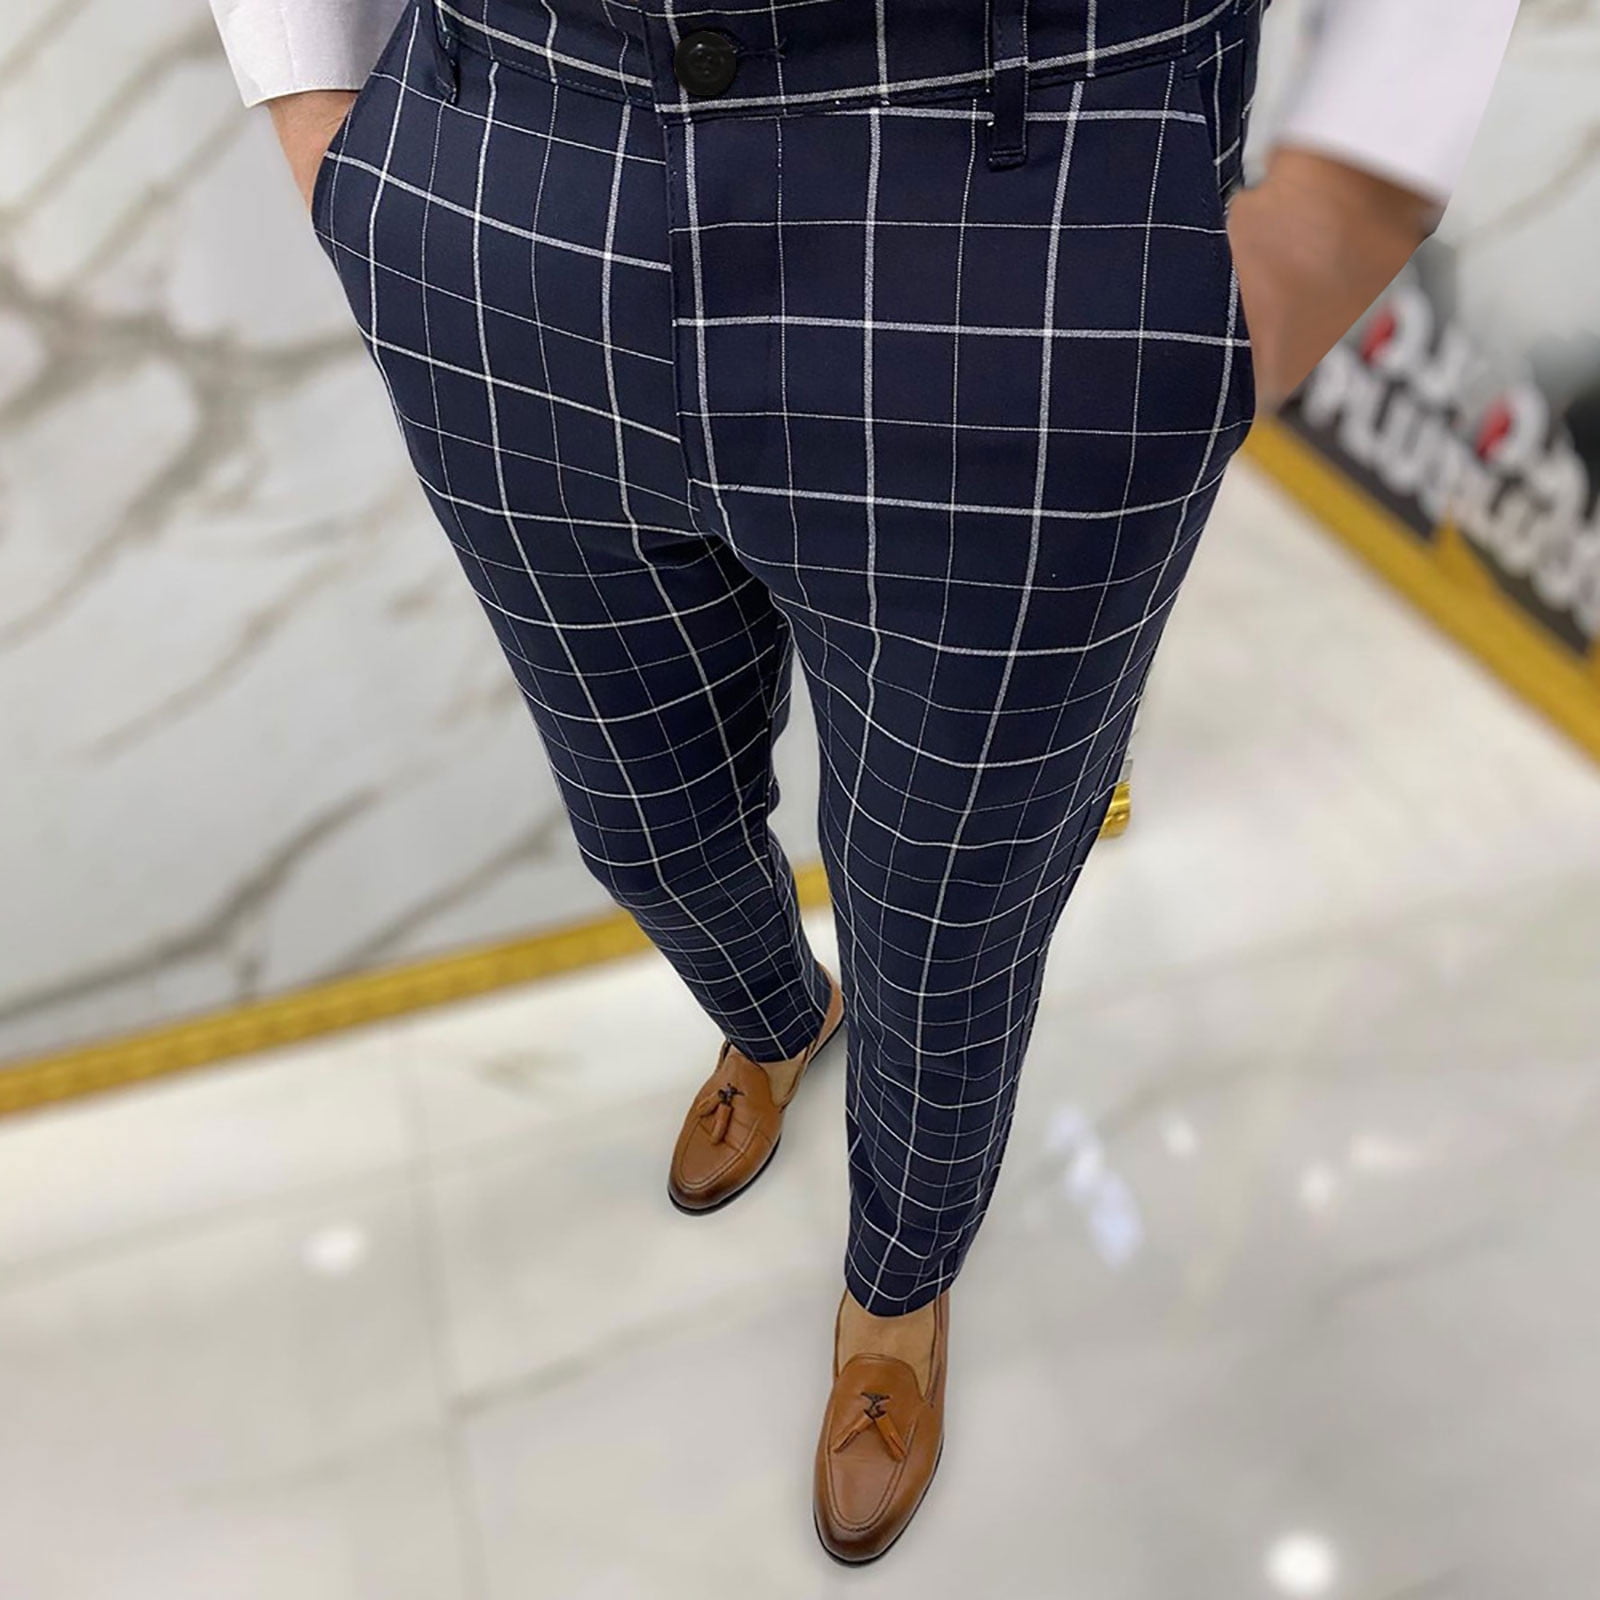 Men's Plaid Dress Pants Casual Slim Fit Flat Front Business Checked Trousers Skinny Pencil Long Pants Party Stretch Pants 